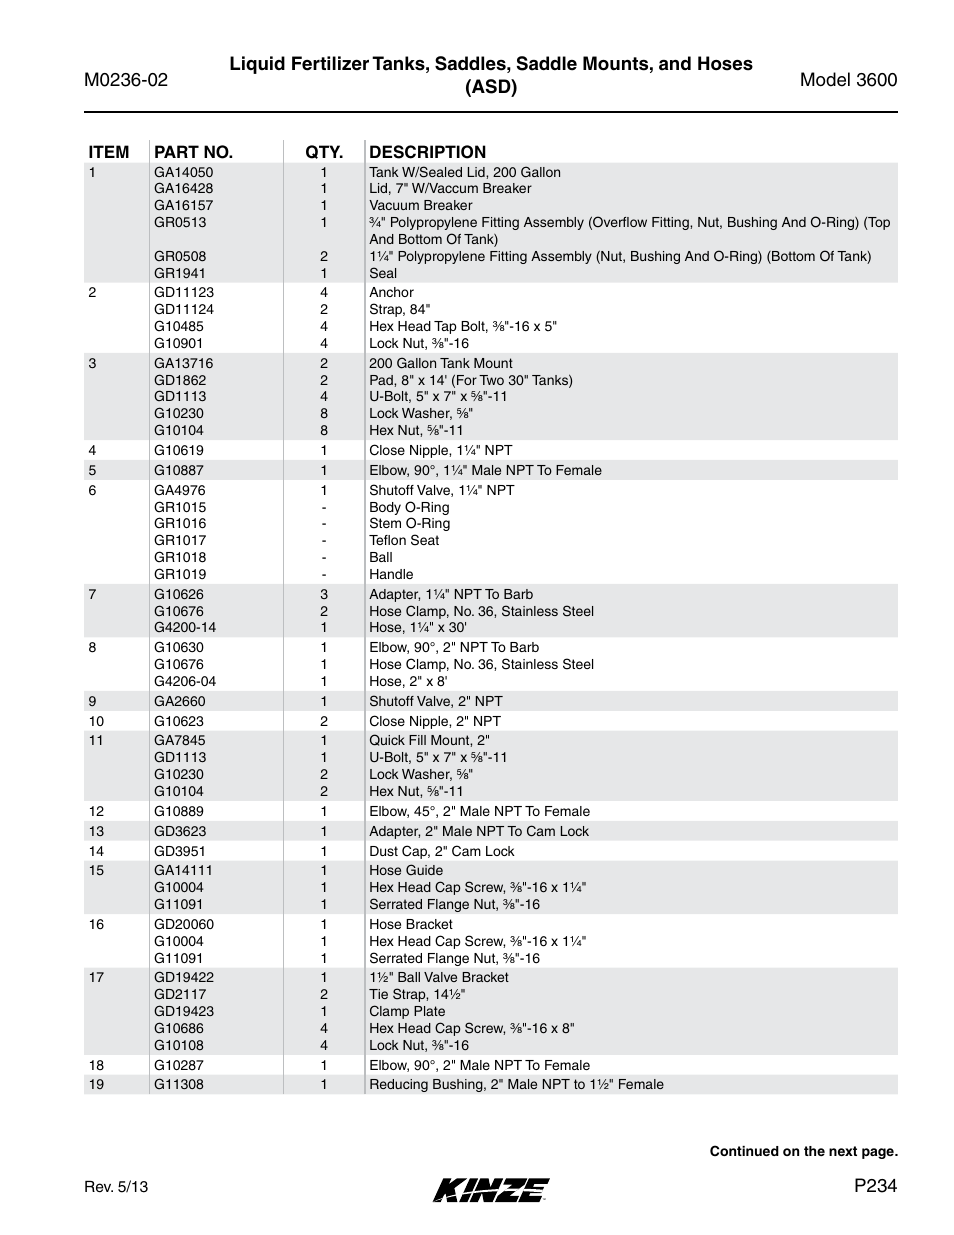 P234 | Kinze 3600 Lift and Rotate Planter Rev. 5/14 User Manual | Page 237 / 302